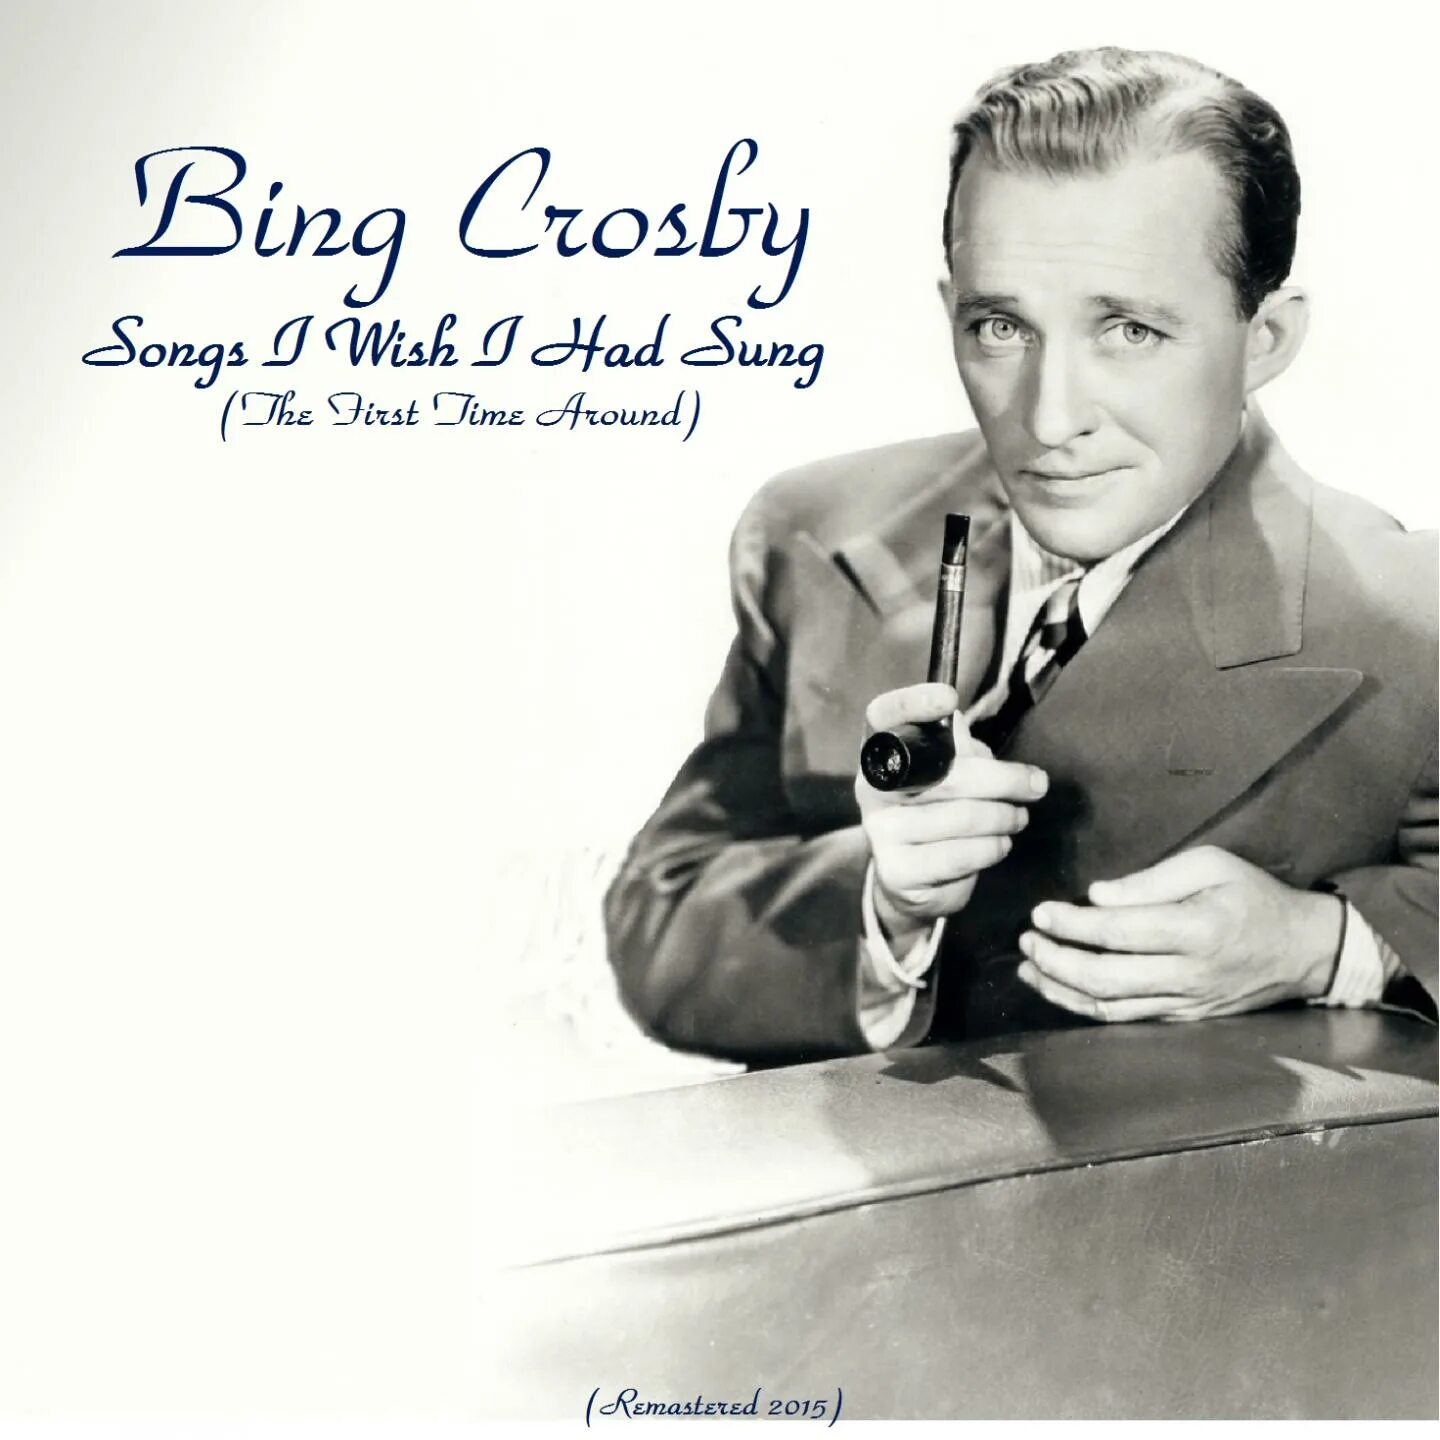 Bing Crosby подпись. Summertime Bing Crosby. Songs i Wish i had Sung (the first time around) (1956). Bing Crosby Sings Song Hits from the King and i.